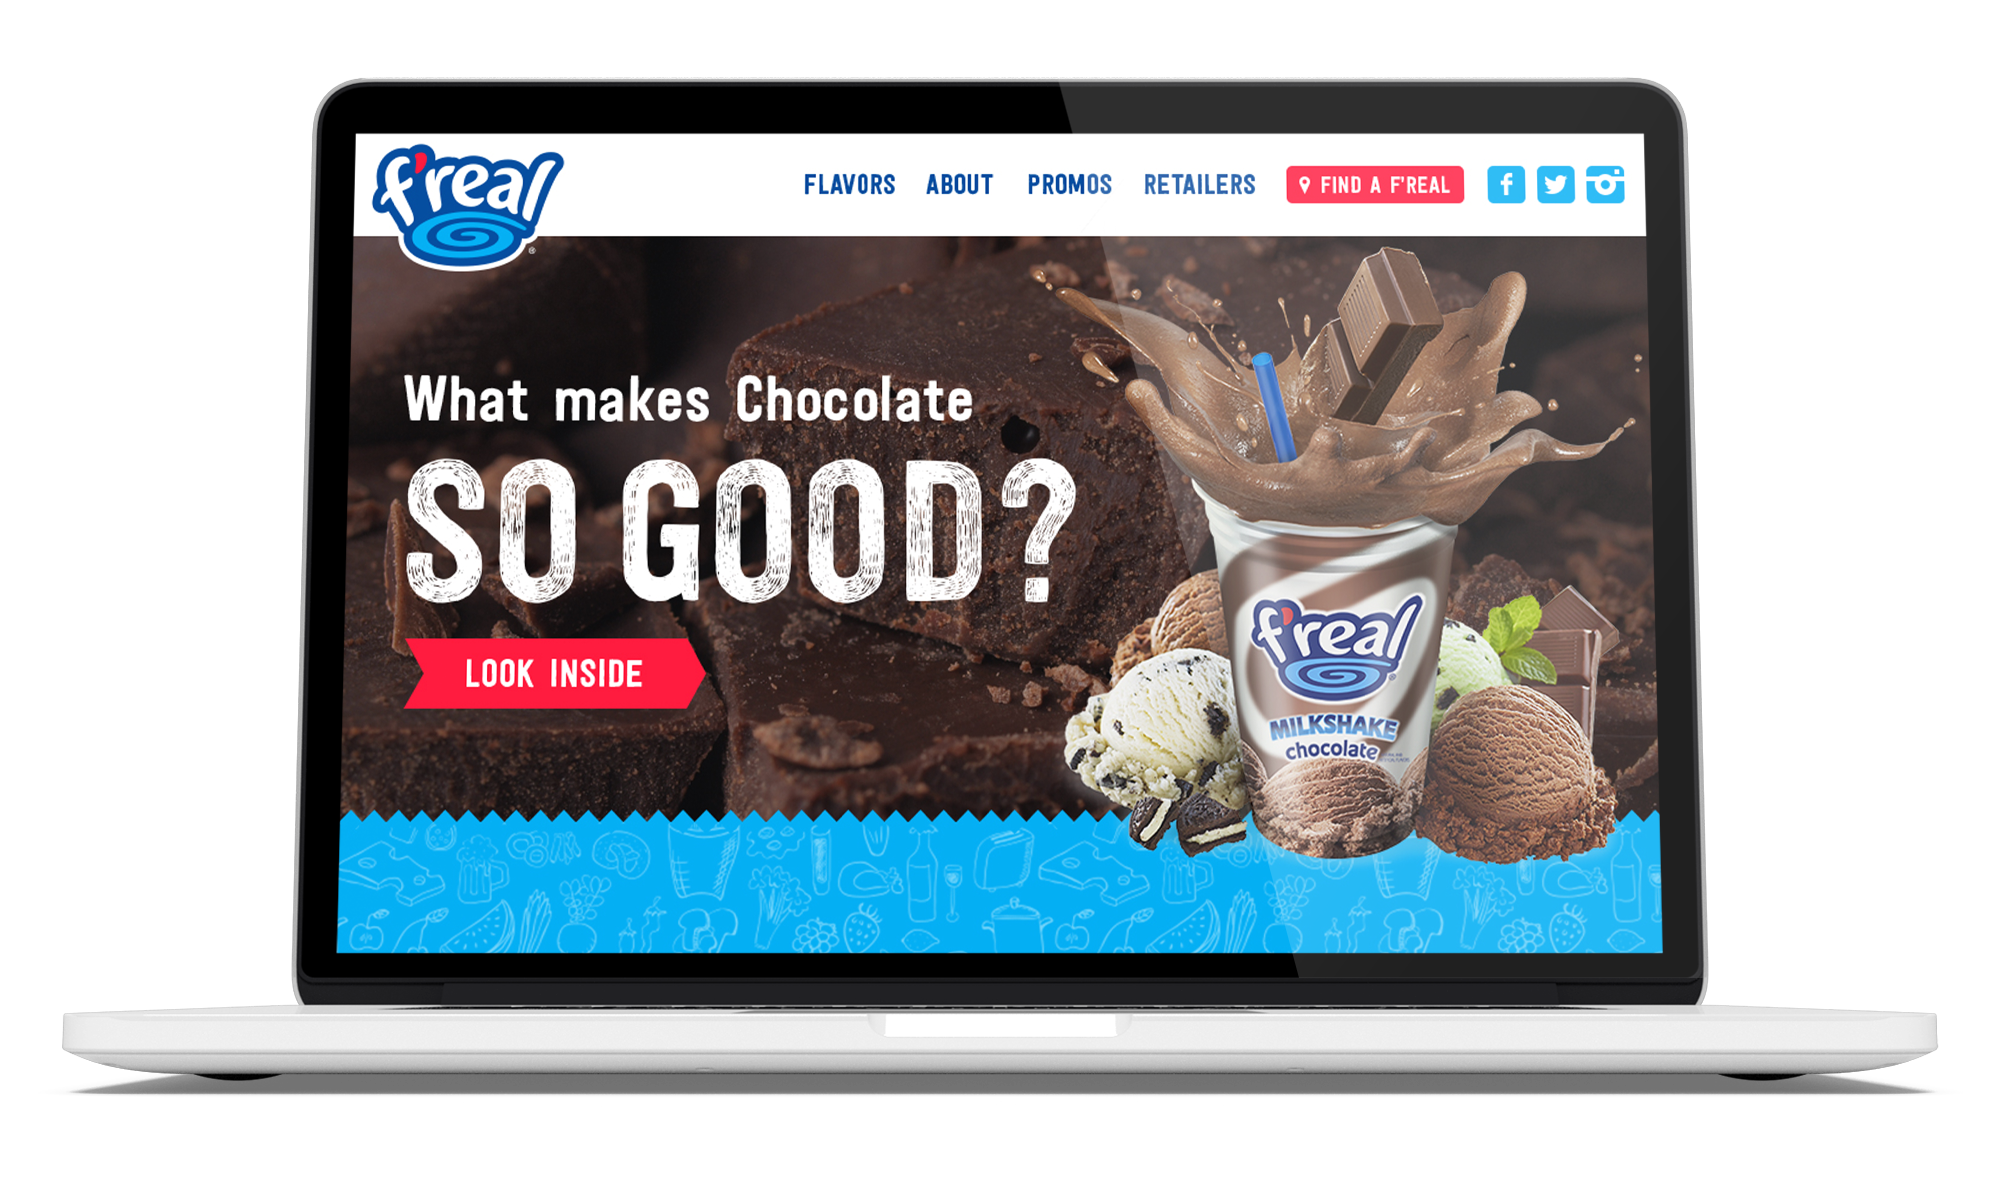 f'real Foods - Case Study